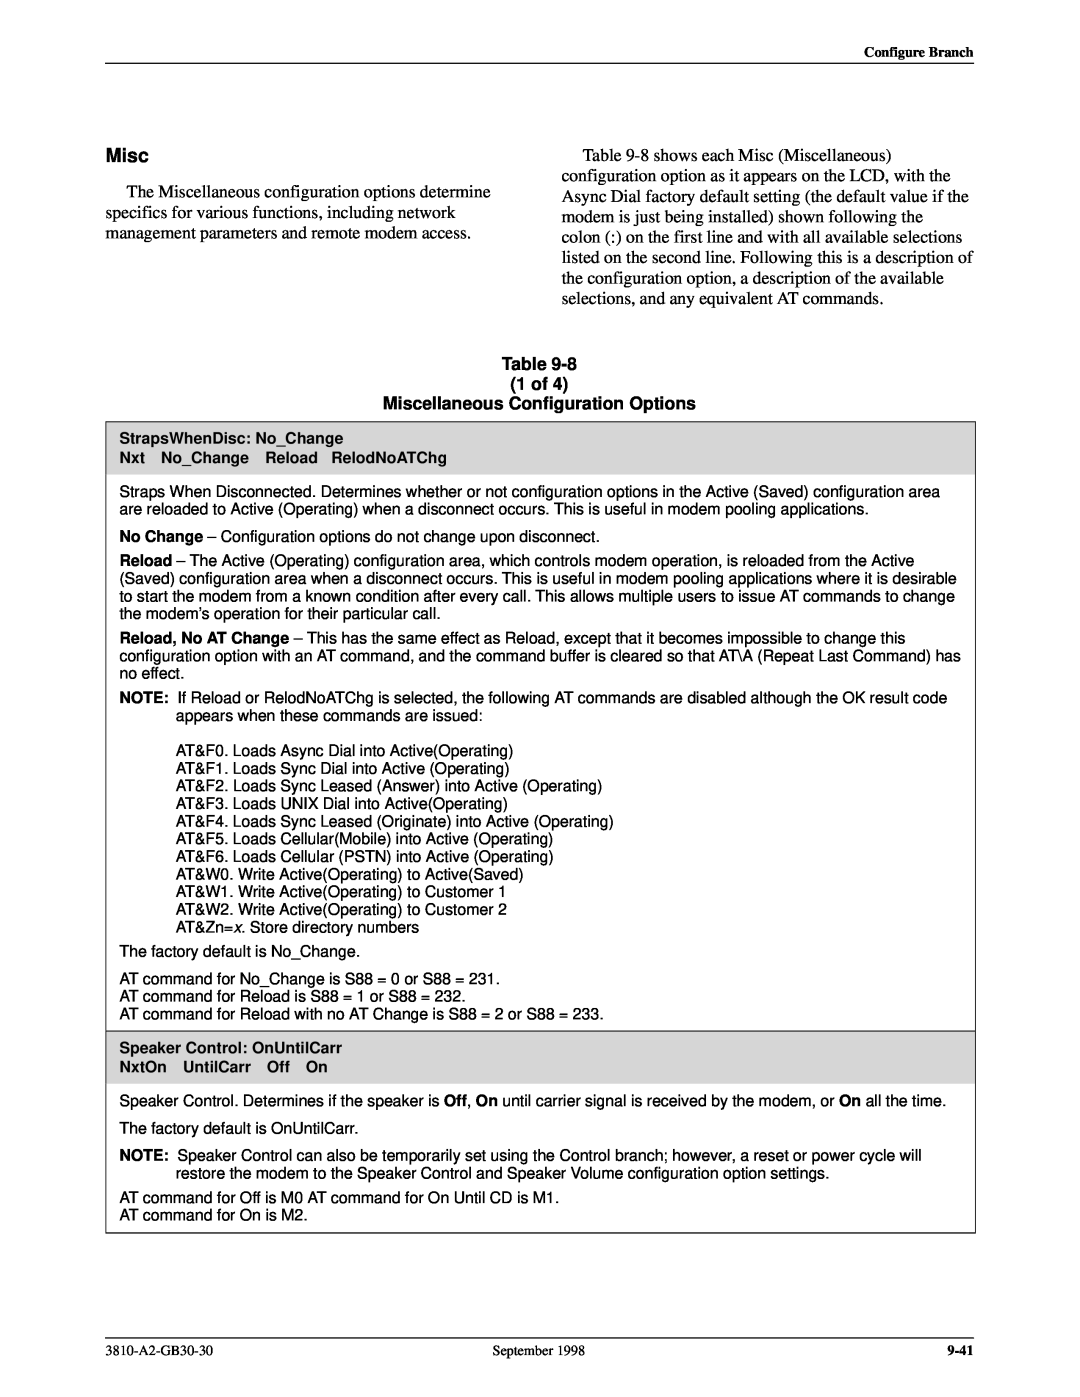 Paradyne 3800 manual of Miscellaneous Configuration Options 